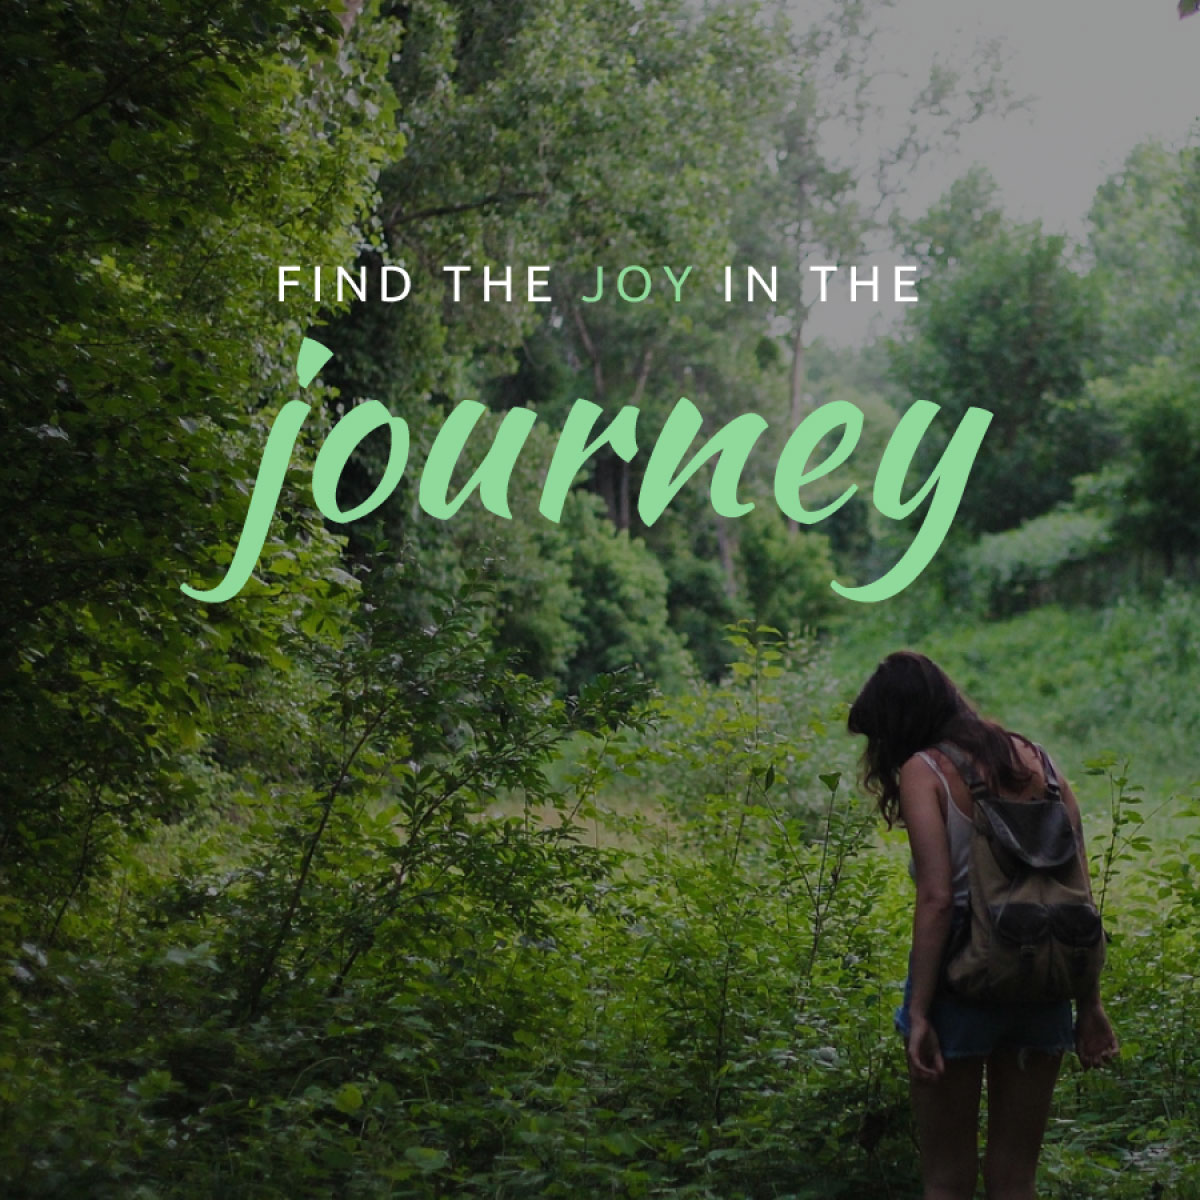 Finding The Joy in the Journey (being mindful)